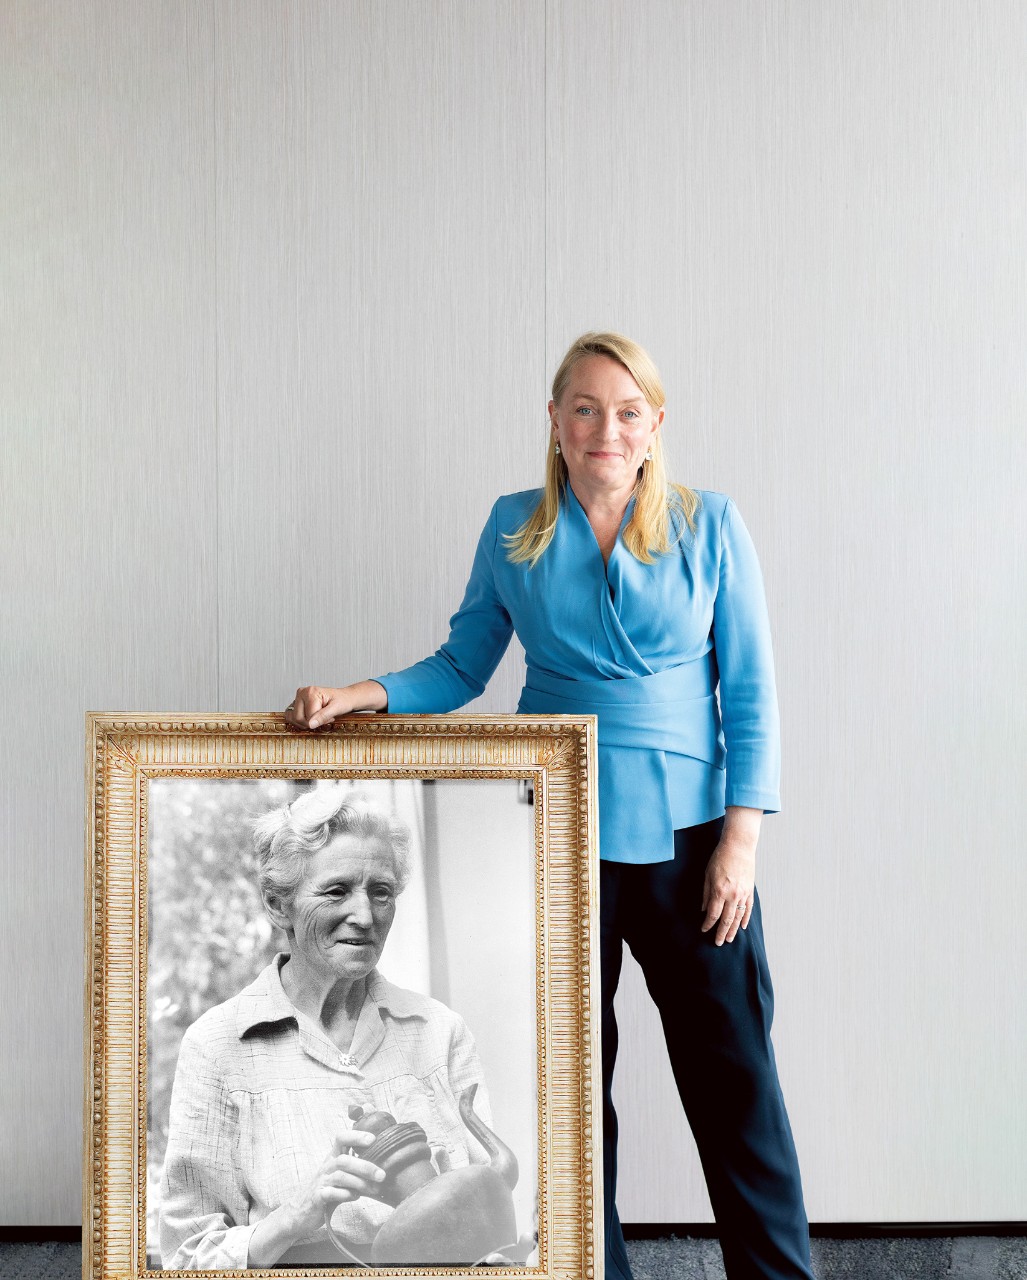 Georgia Dawson leaning against a frame with a blue blouse and black pants, inside the frame is a black and white photofraph of Marie Byles